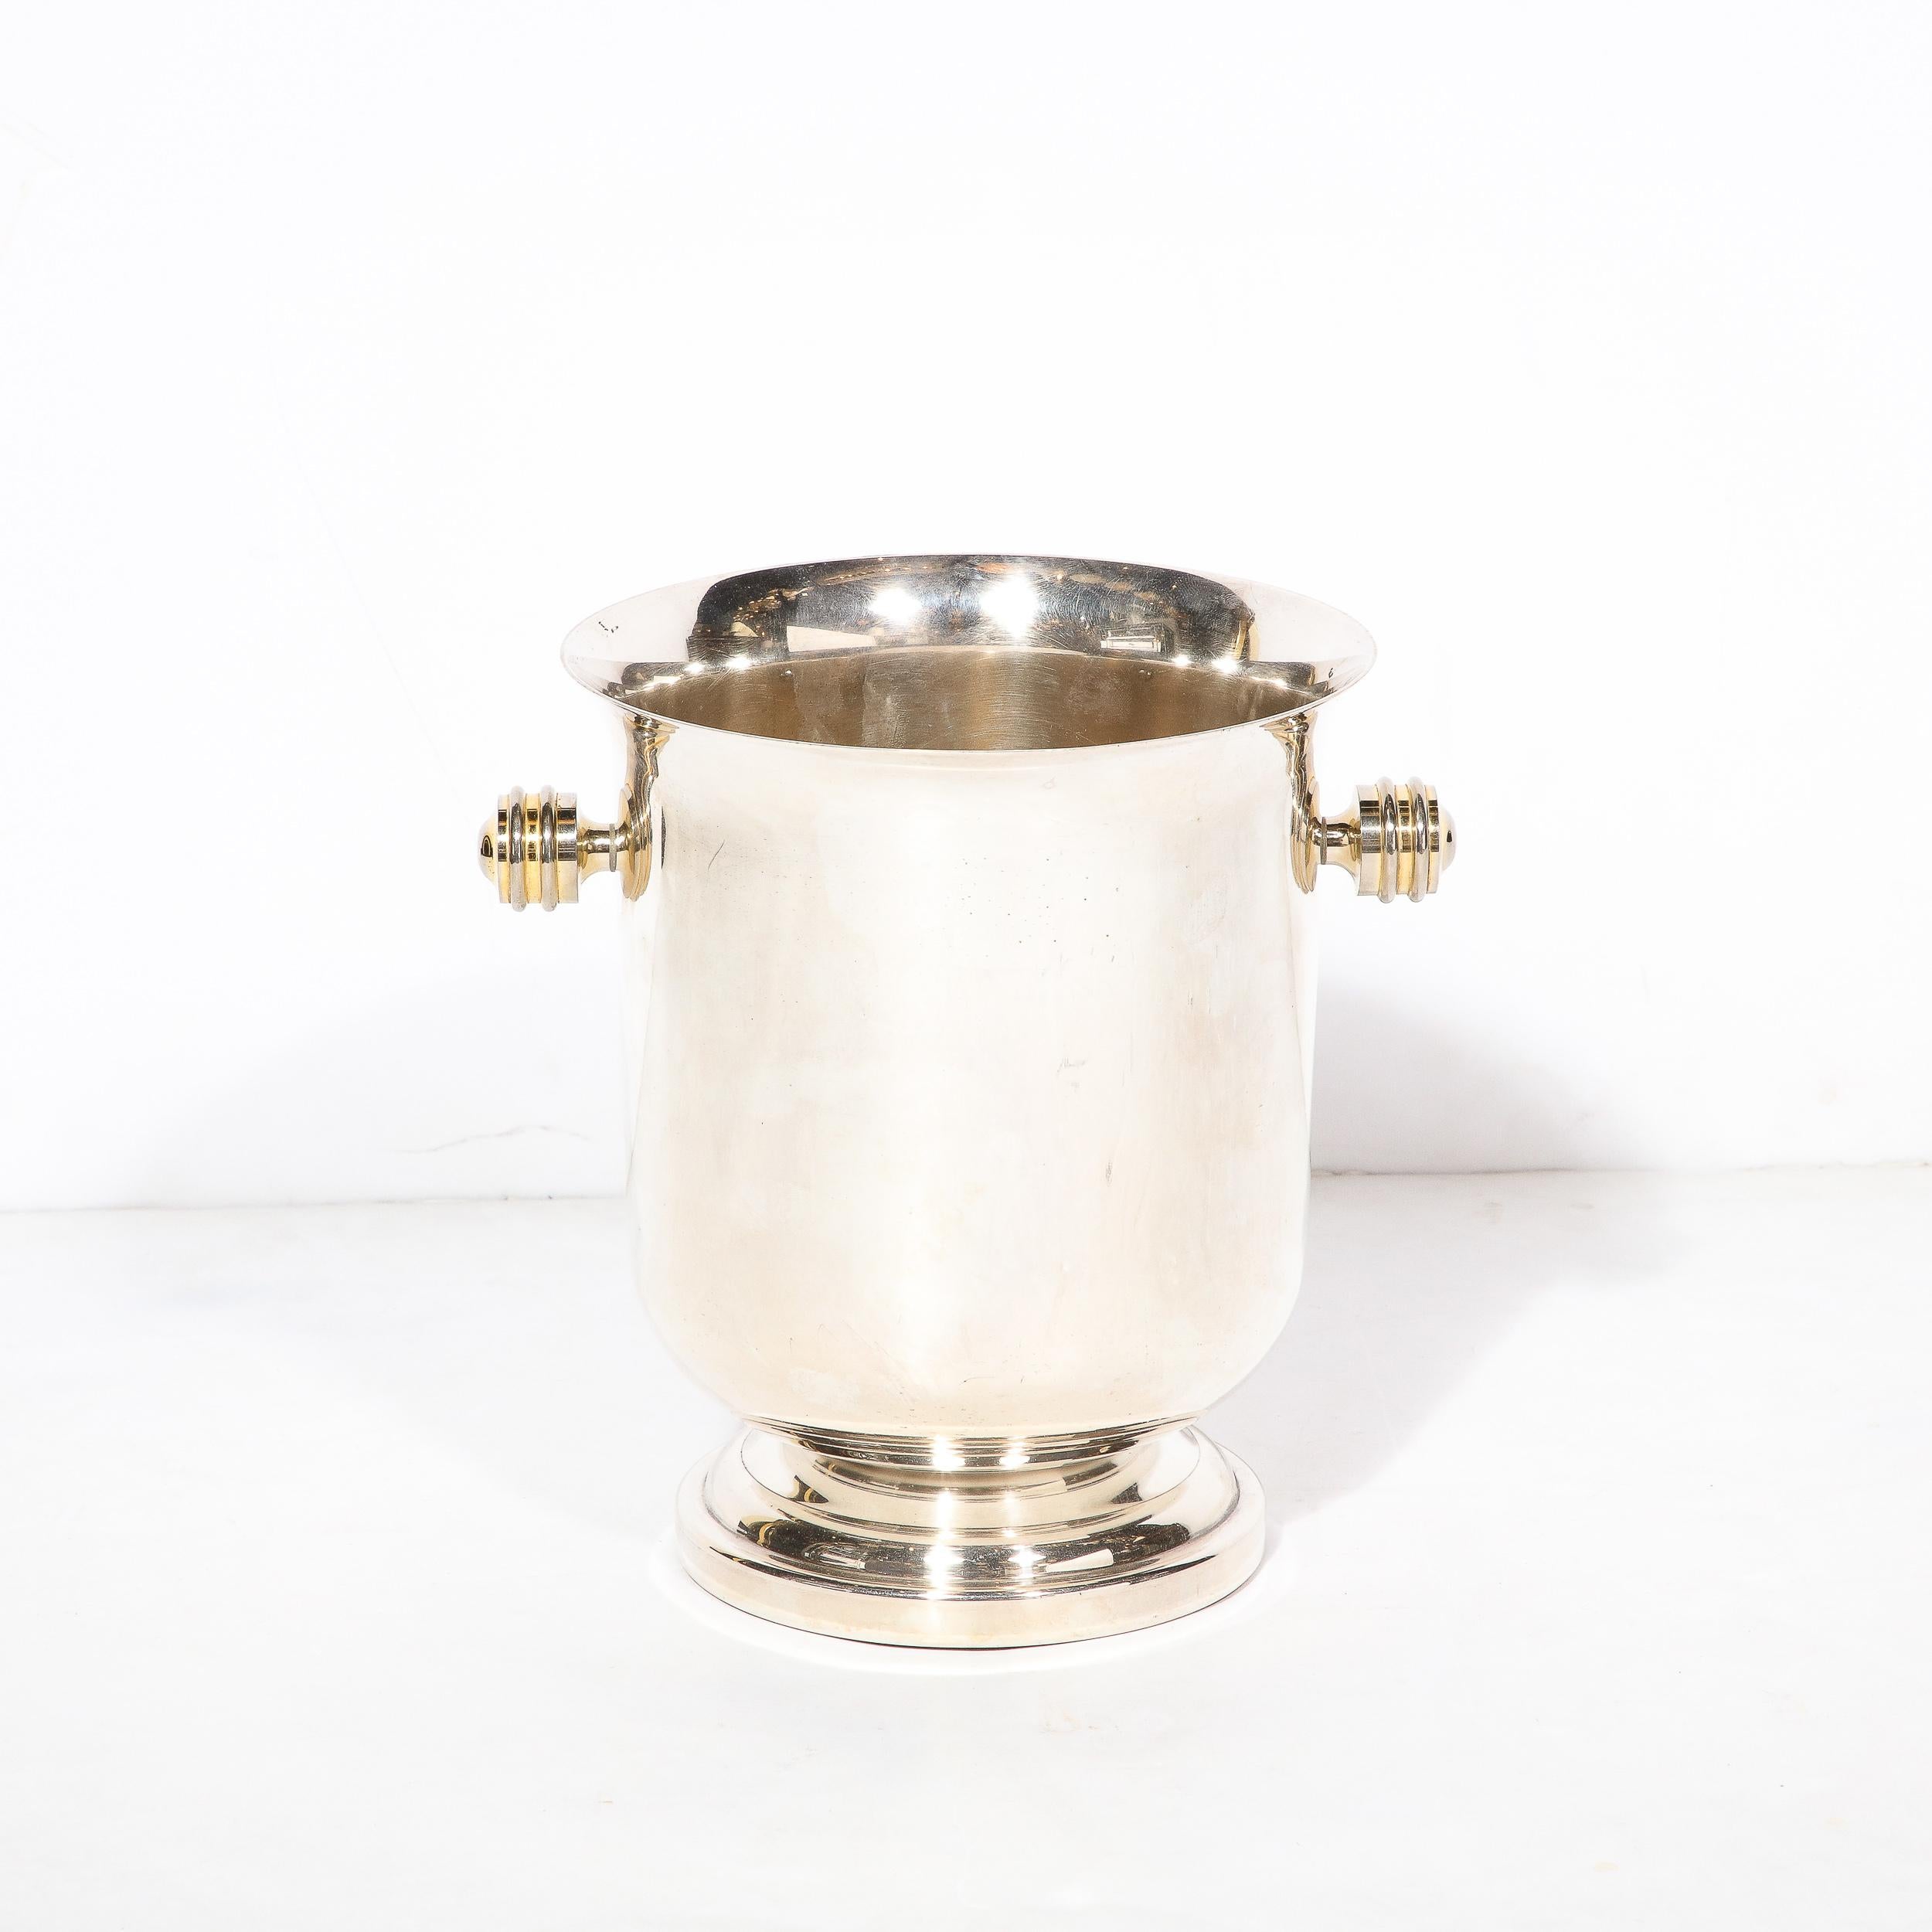 This beautiful Art Deco Machine Age Silver plate ice Bucket originates from France, Circa 1930. Featuring a curved and beautifully expansive opening that tapers inwards near the base, the handles of the piece are particularly beautiful, milled